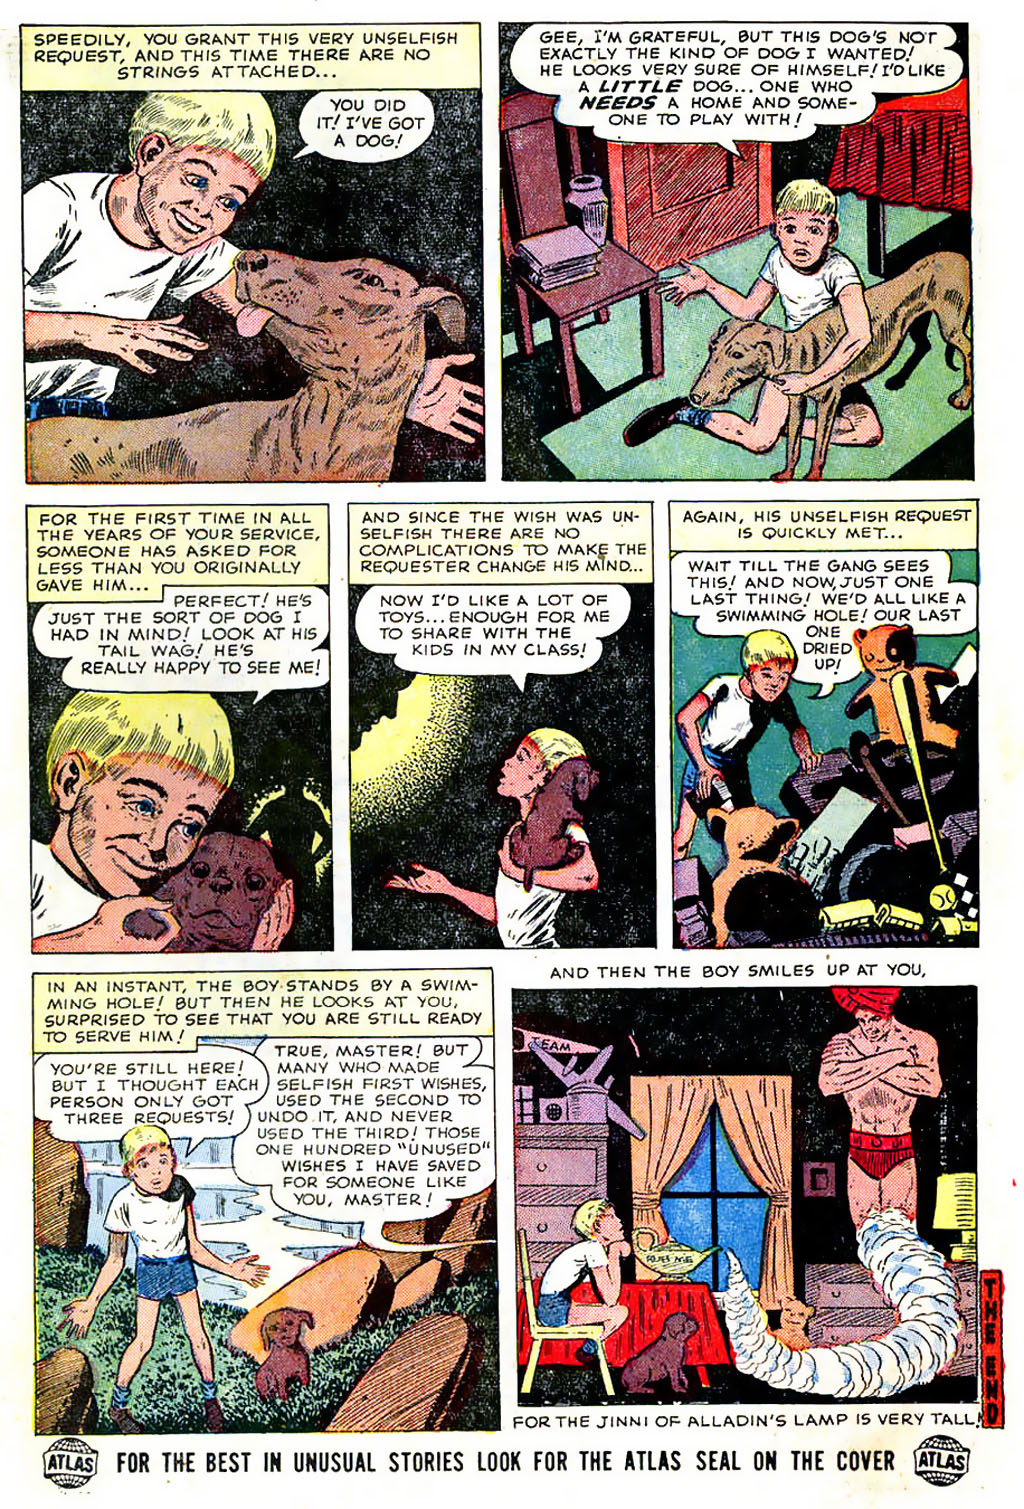 Journey Into Mystery (1952) 25 Page 13